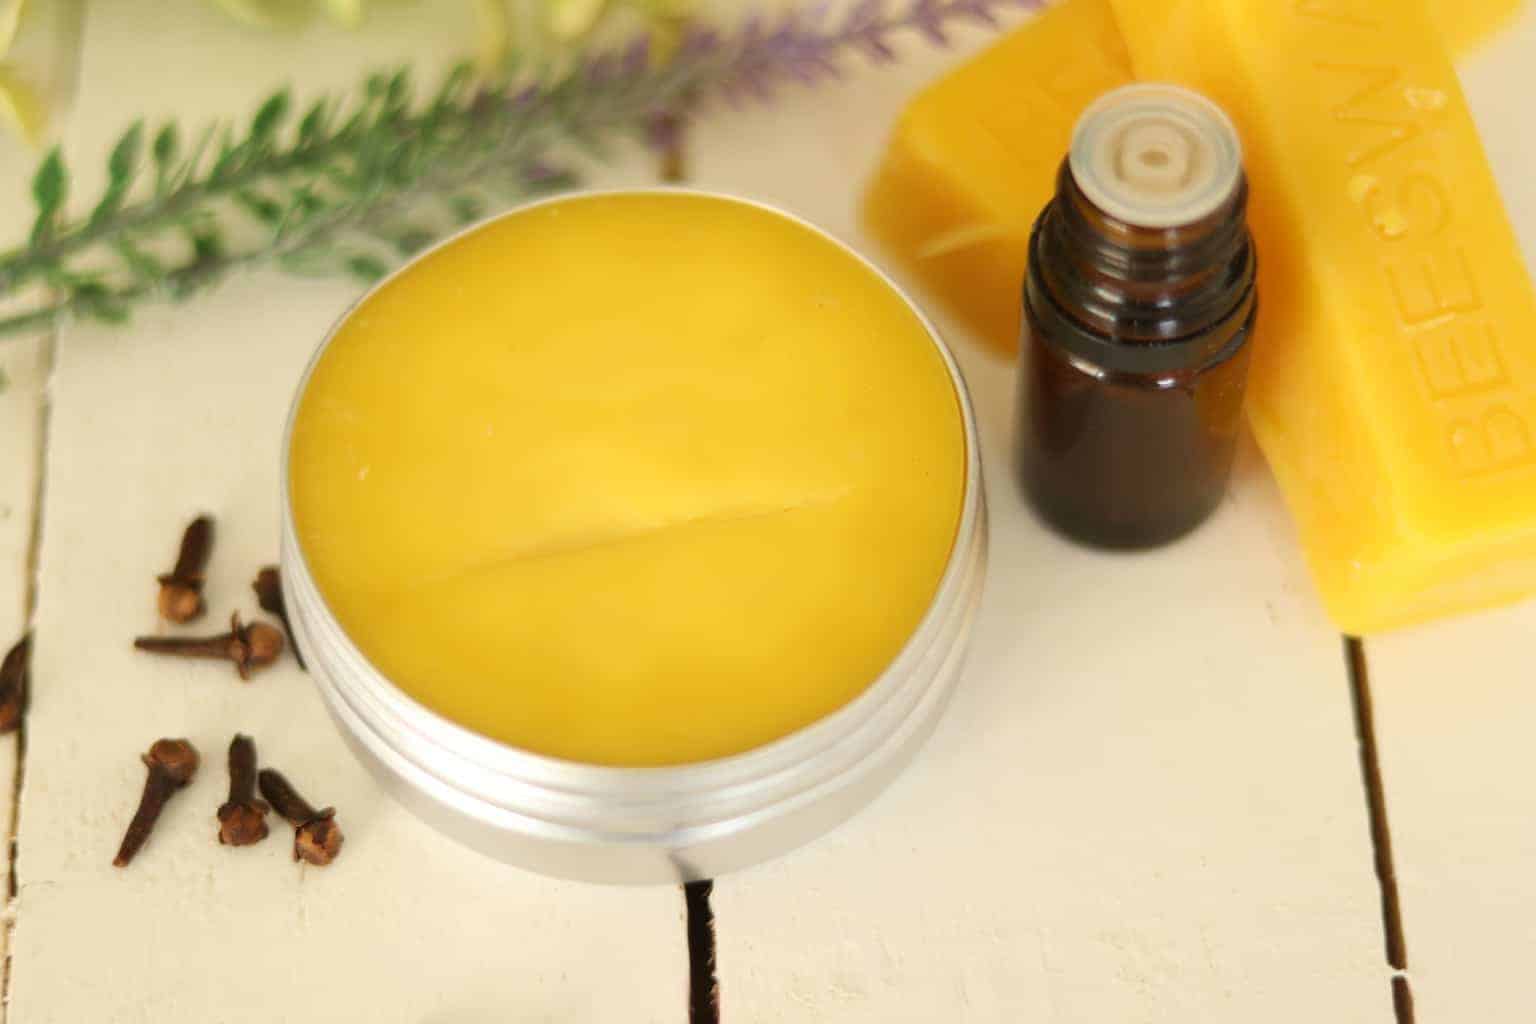 Solid perfume on wooden table with essential oil bottle, beeswax, and flowers.